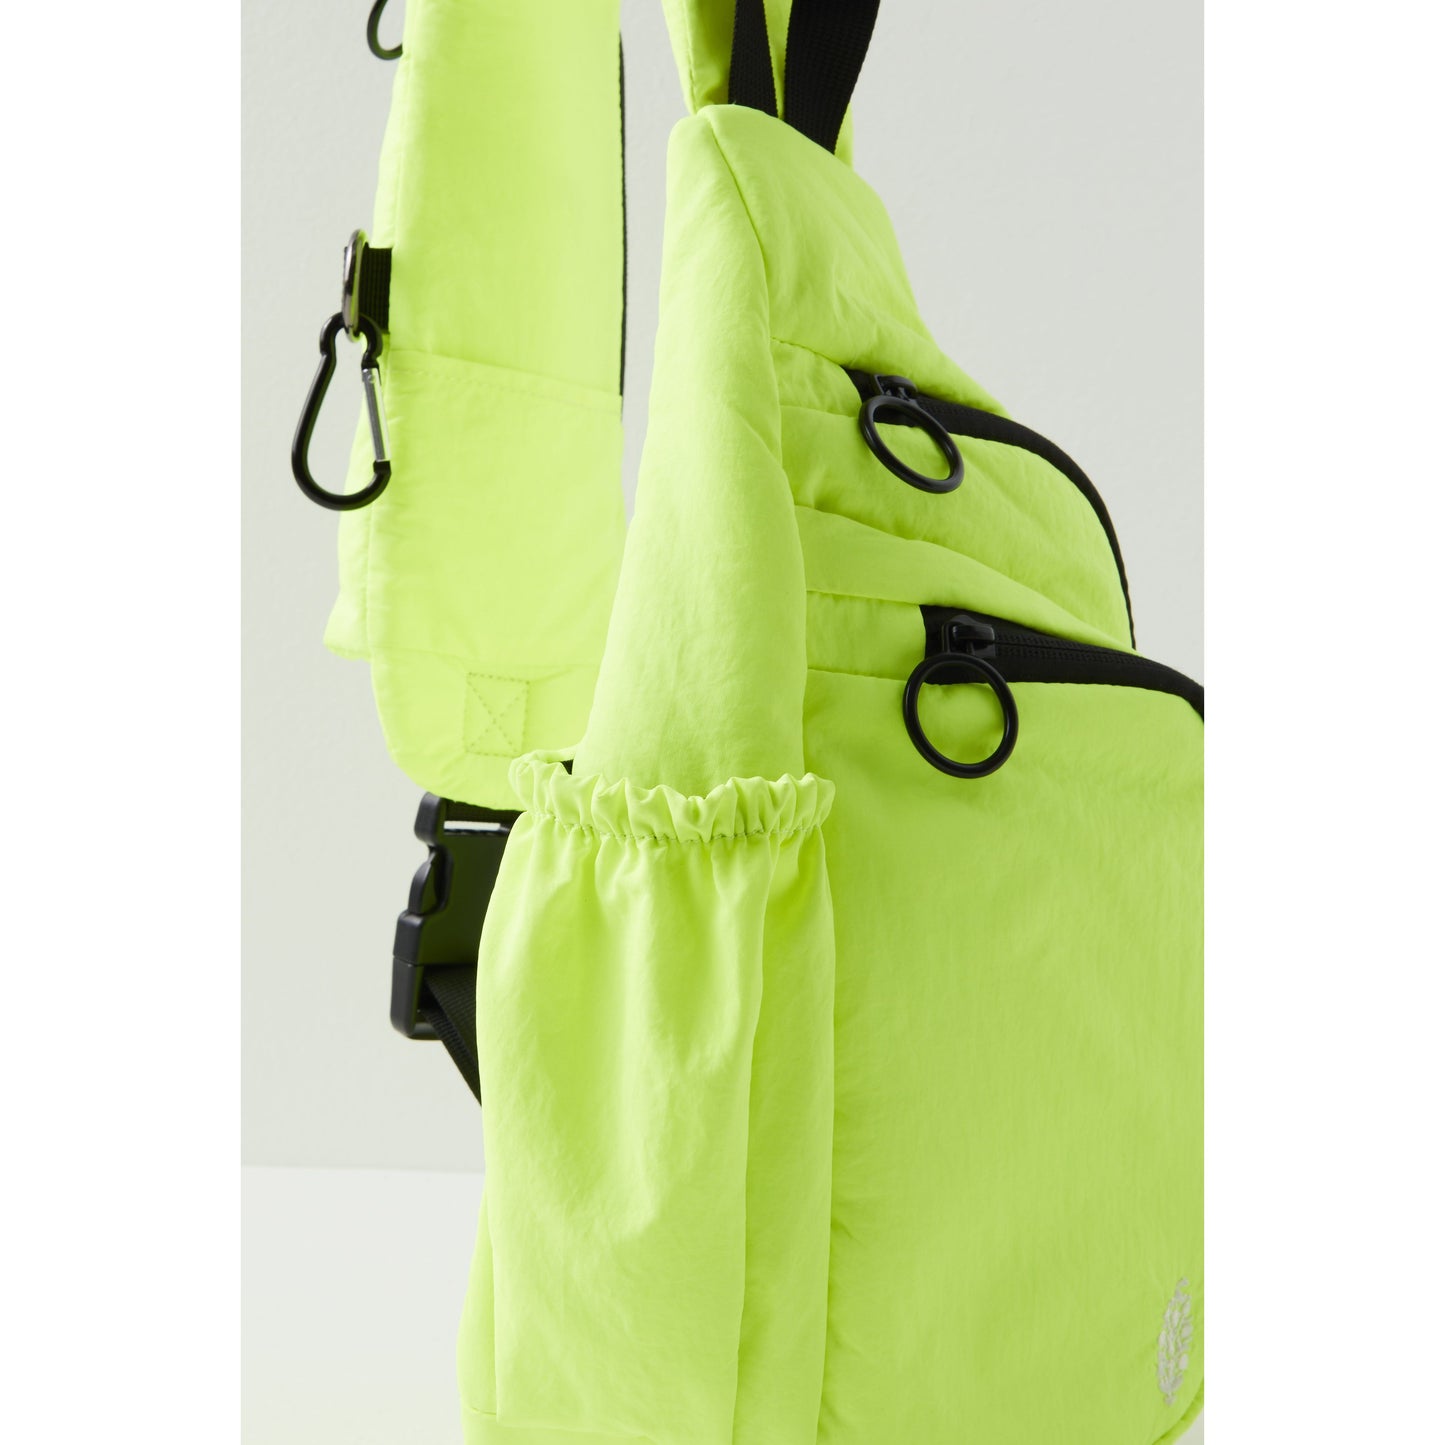 Neon green Renegade Sling with a ruched pocket detail, adjustable black straps, and metallic rings by Free People Movement.